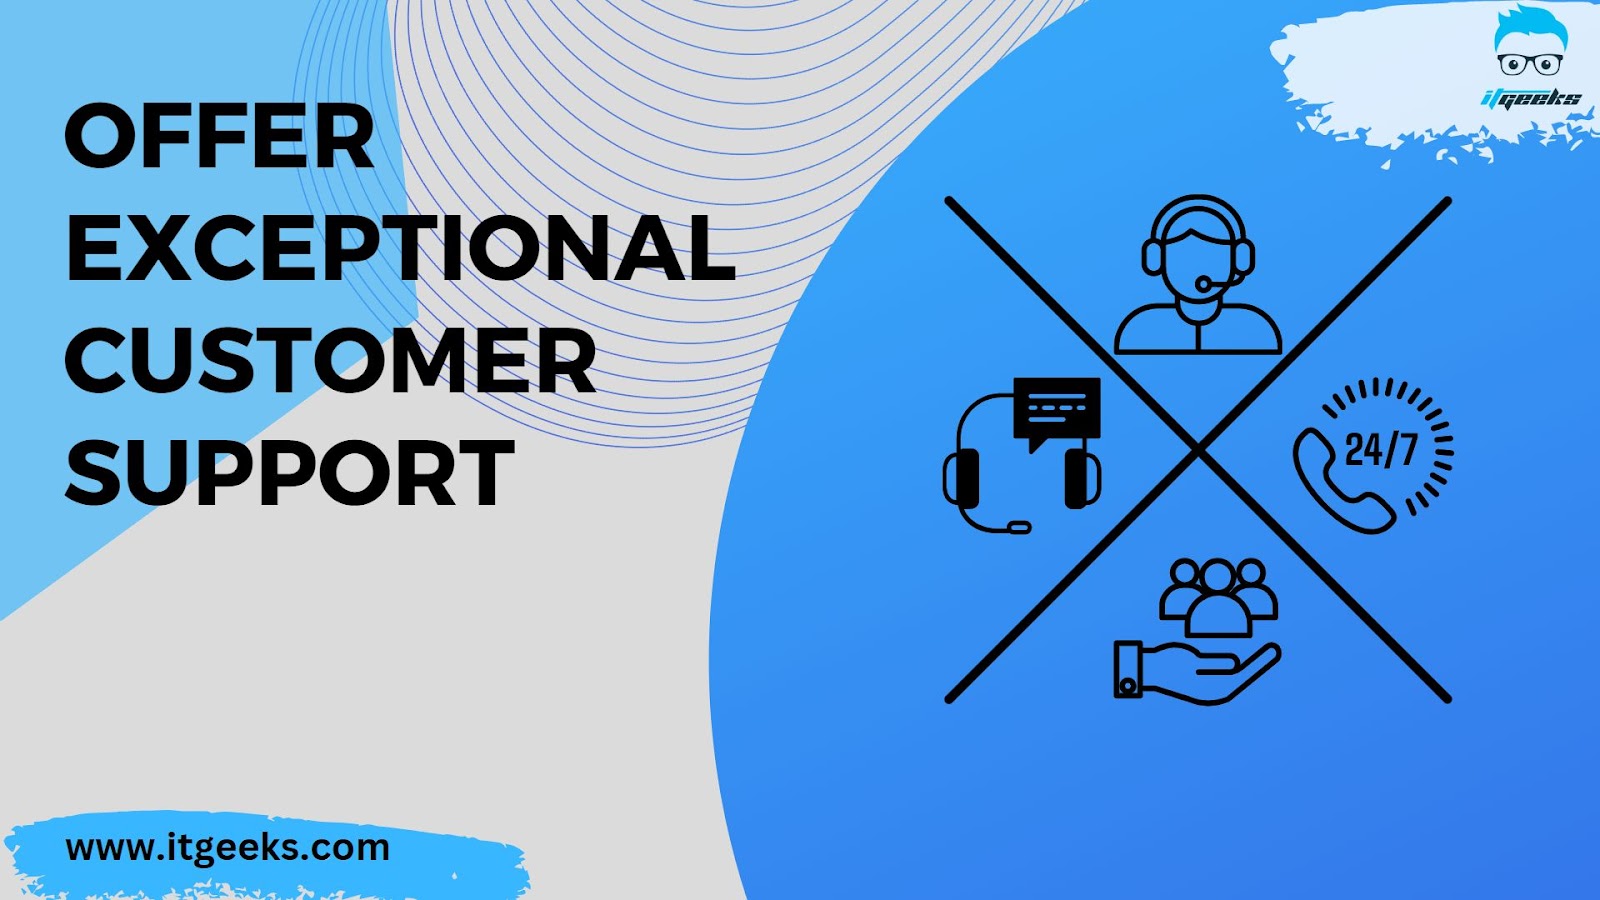 Offer Exceptional Customer Support